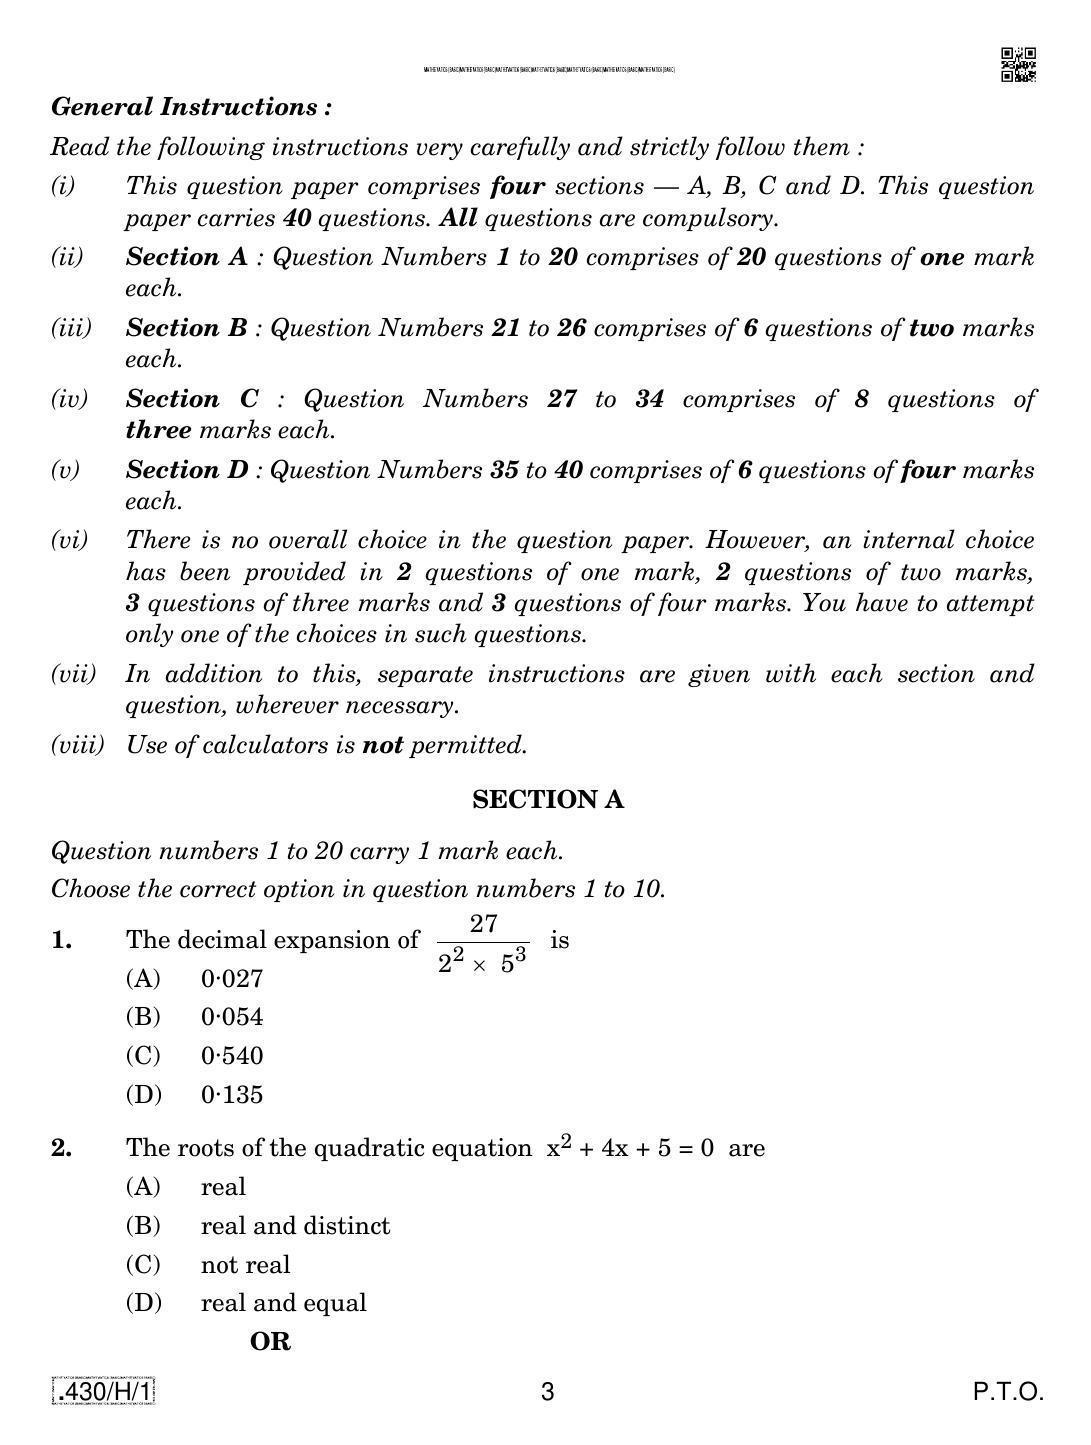 CBSE Class 10 430-C-1 - Maths (Basic) 2020 Compartment Question Paper - Page 3